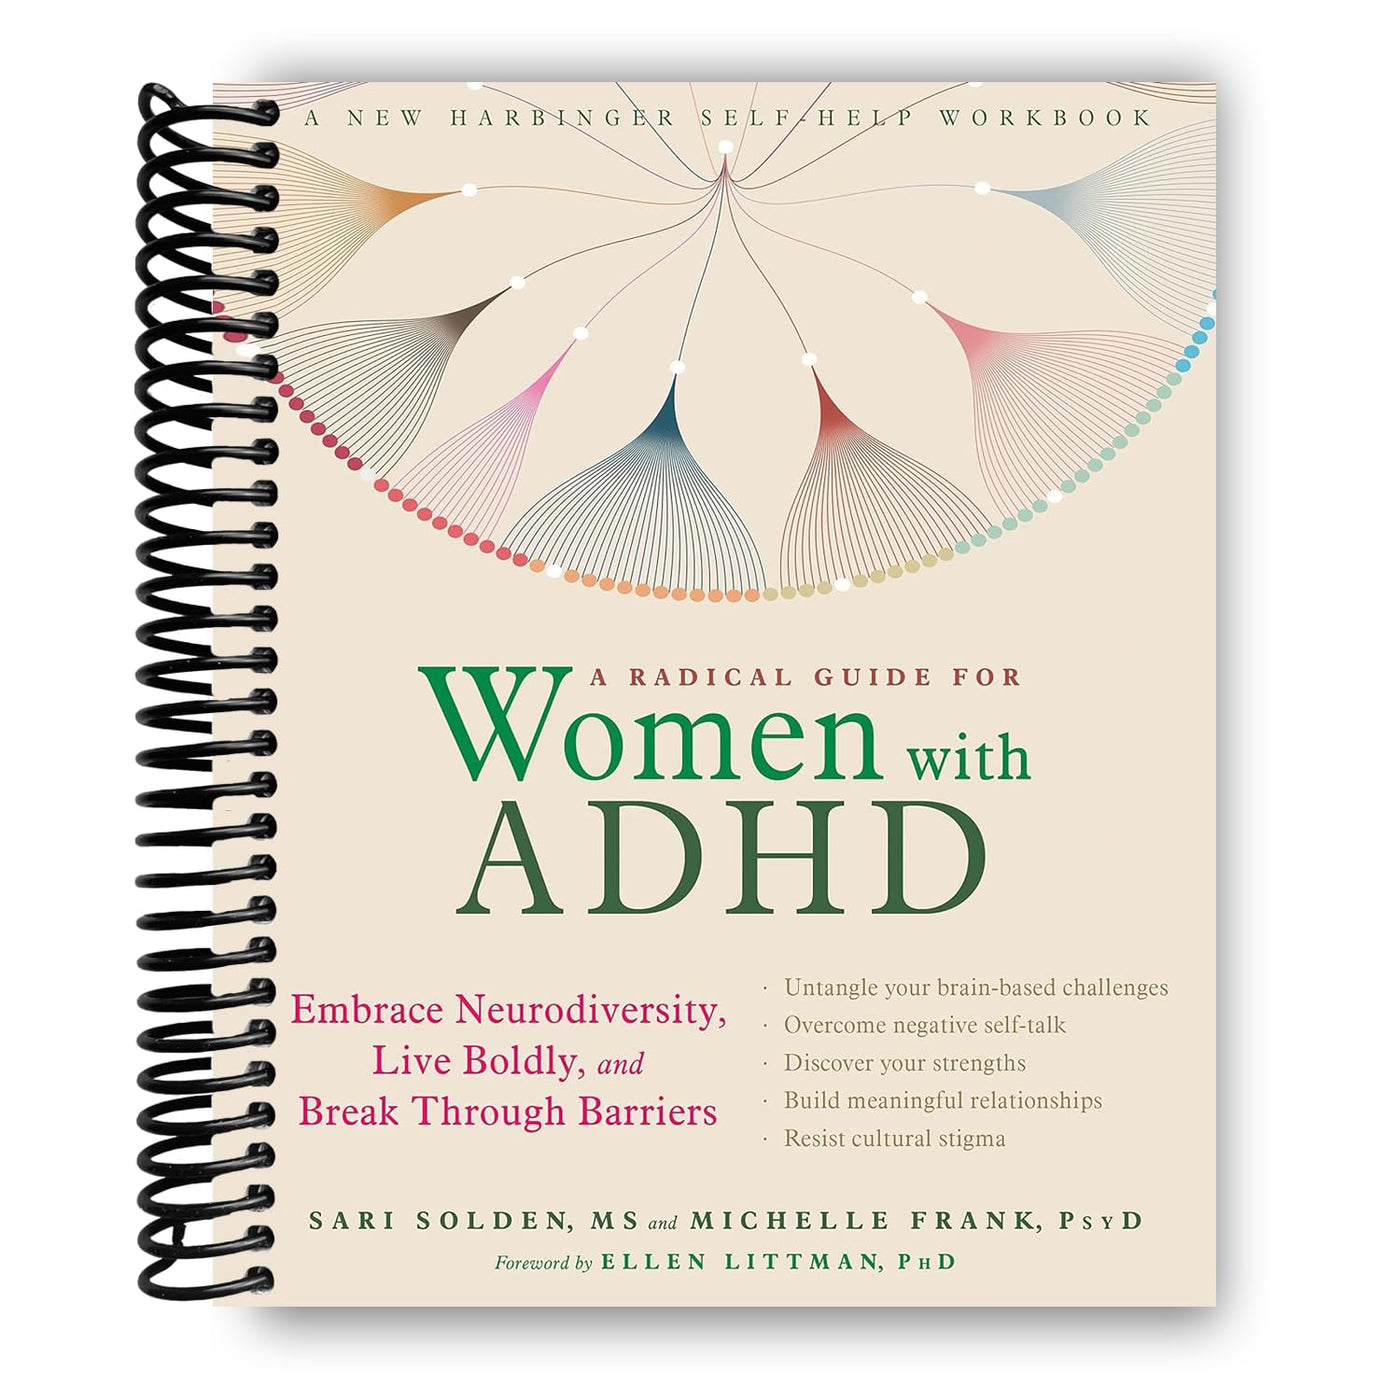 A Radical Guide for Women with ADHD (Spiral Bound)